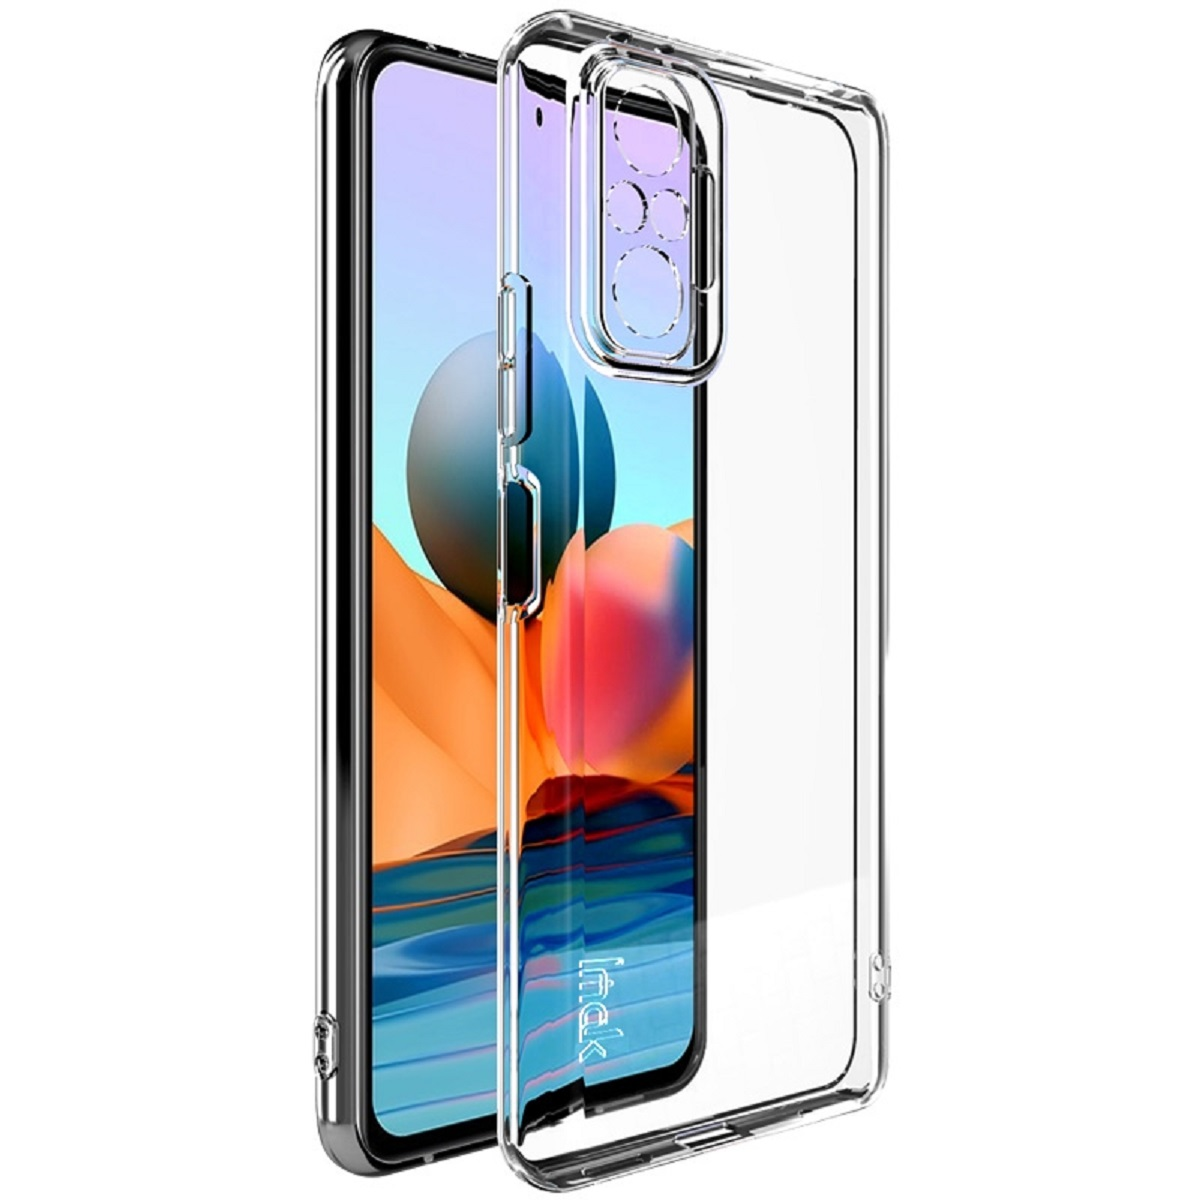 Hülle, PROTECTORKING Backcover, 10 Xiaomi, Pro, Backcover, Redmi Note Transparent